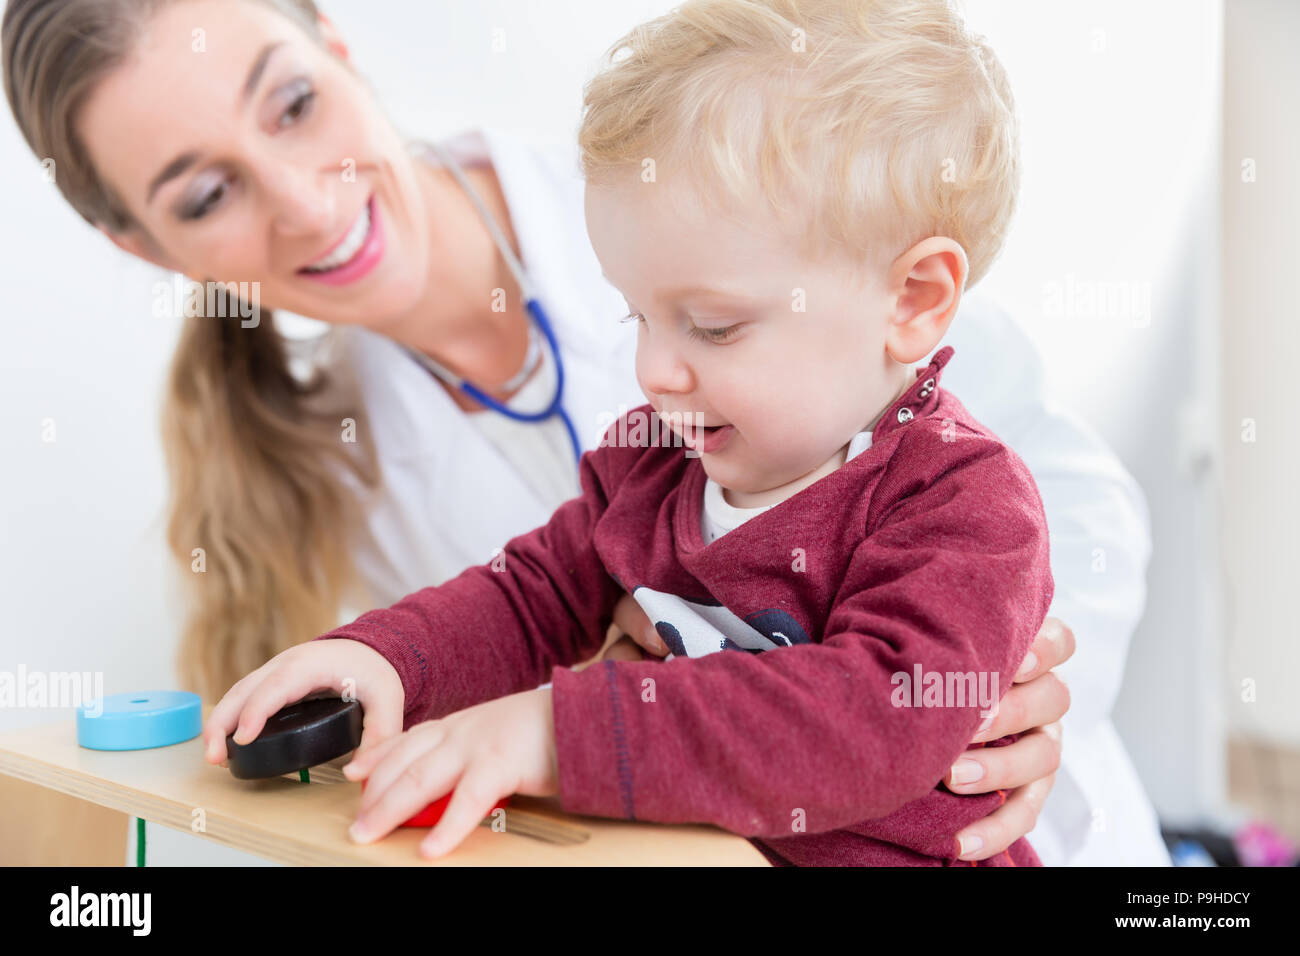 Cute active baby boy playing with toys during physical examination Stock Photo